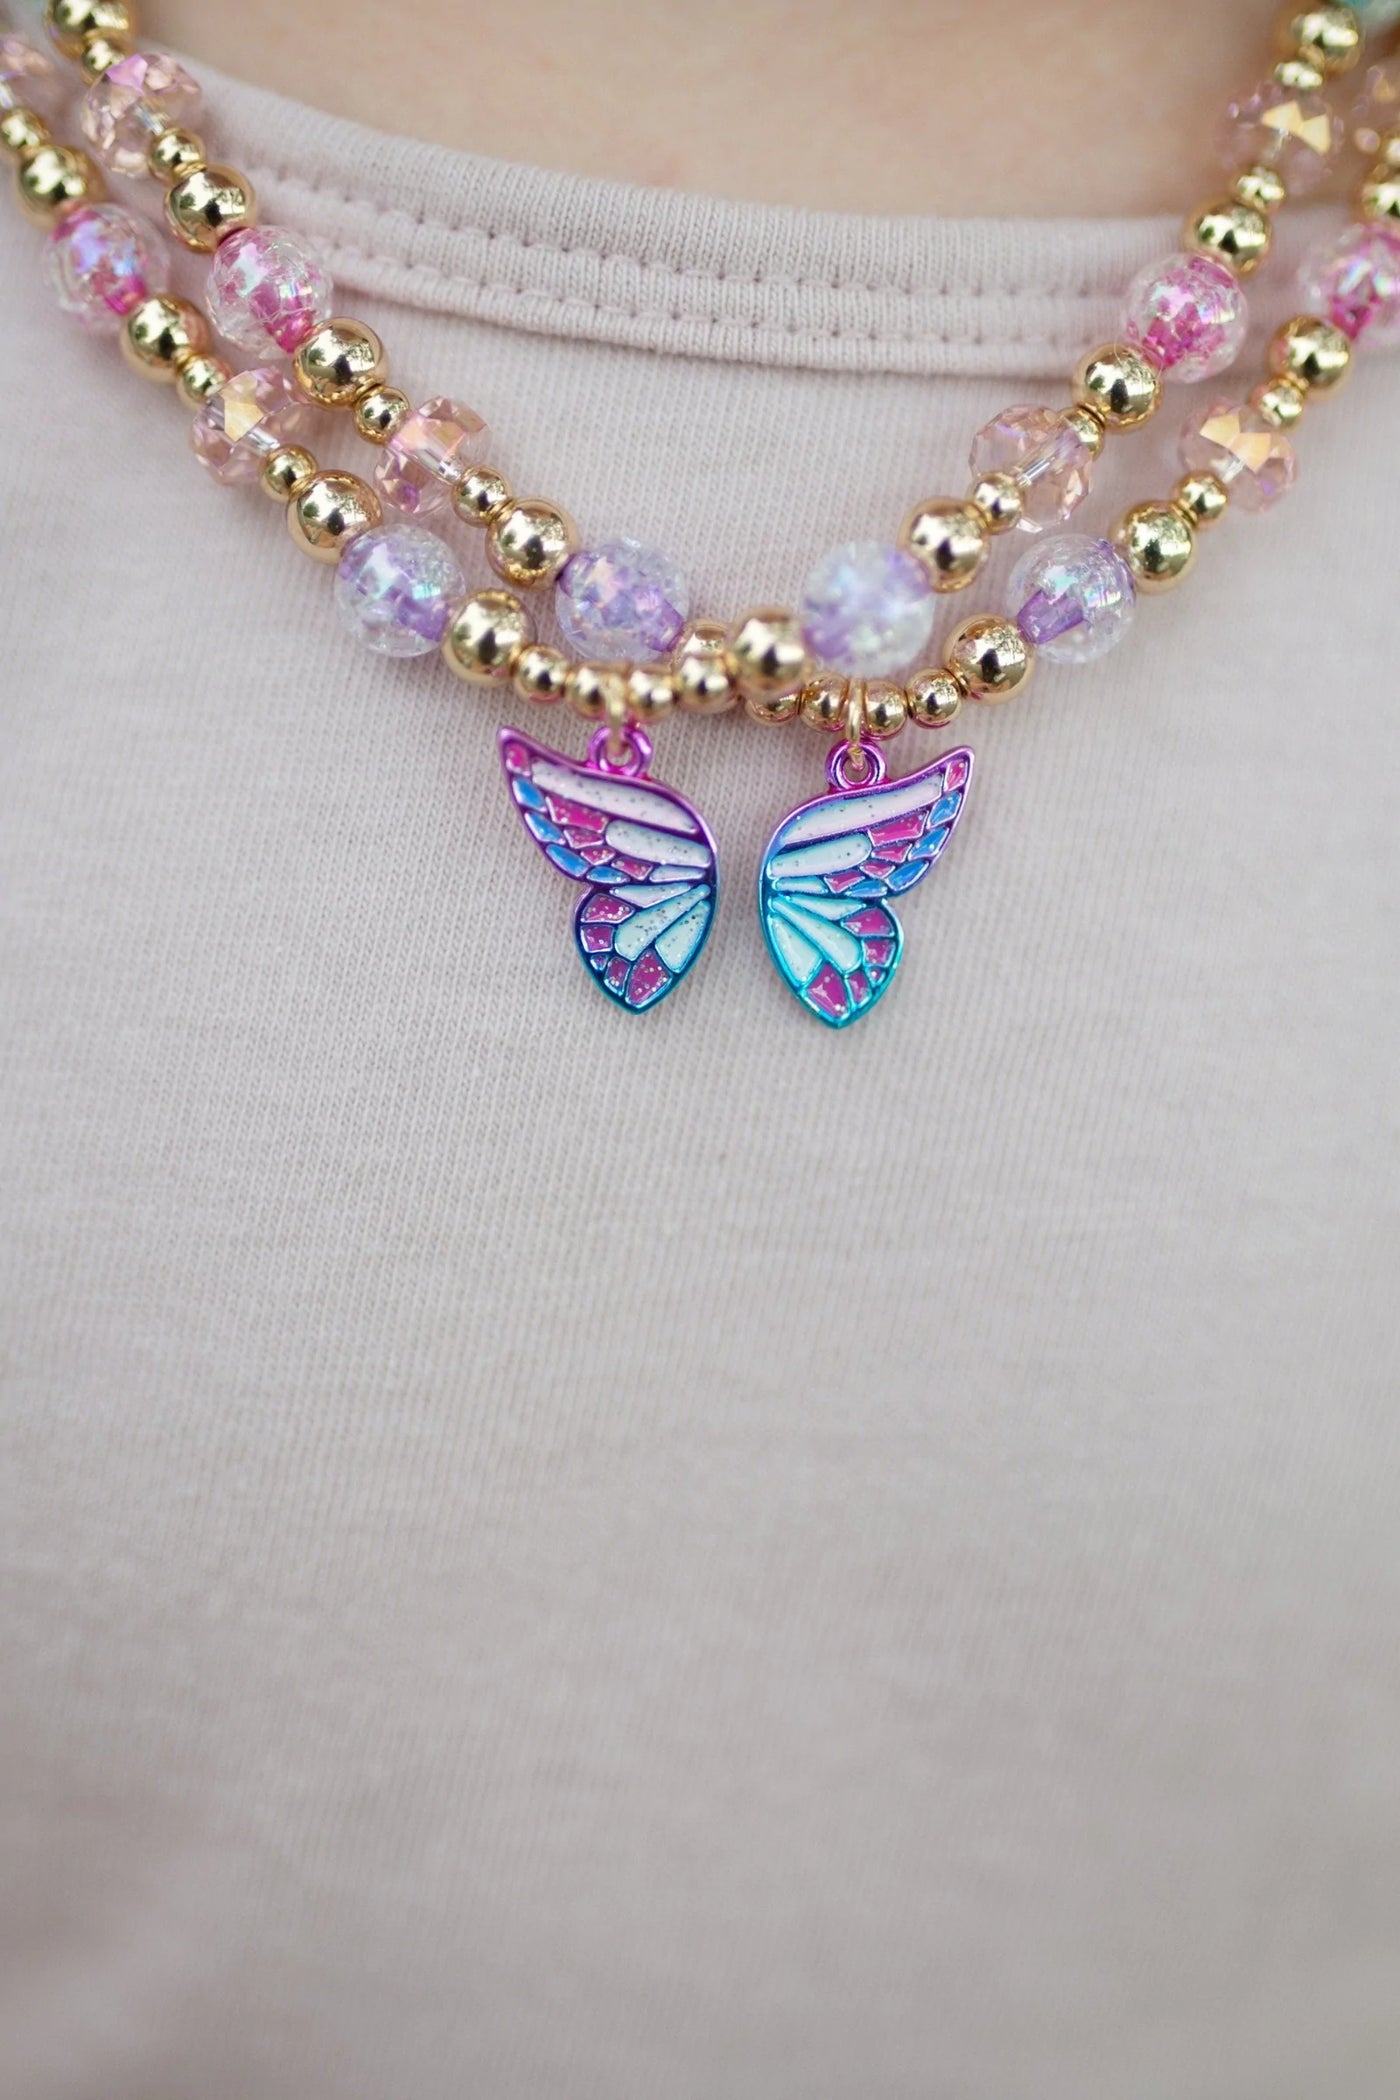 BUTTERFLY WISHES BFF NECKLACES - Breckenridge Baby